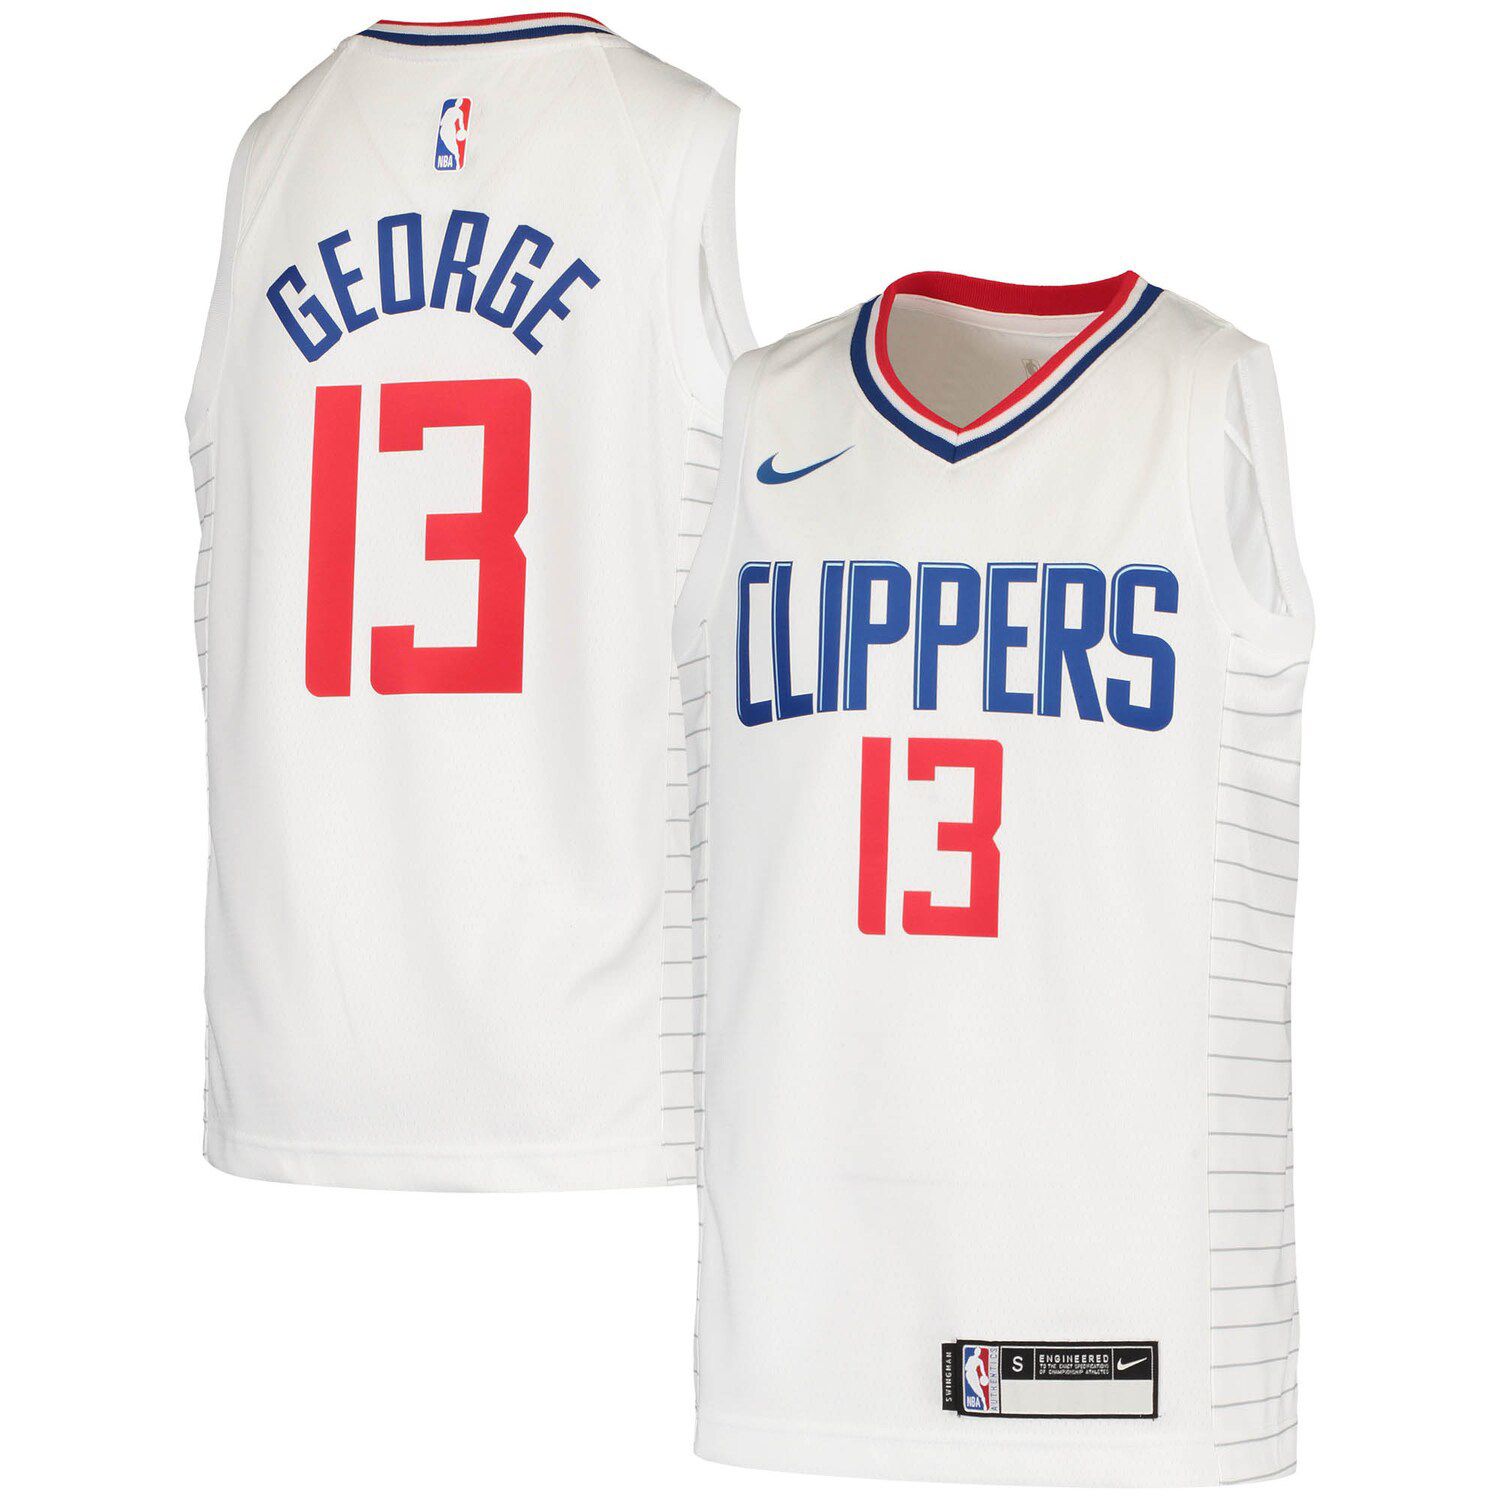 Authentic Men's Paul George White Jersey - #13 Basketball Los Angeles  Clippers Association Edition